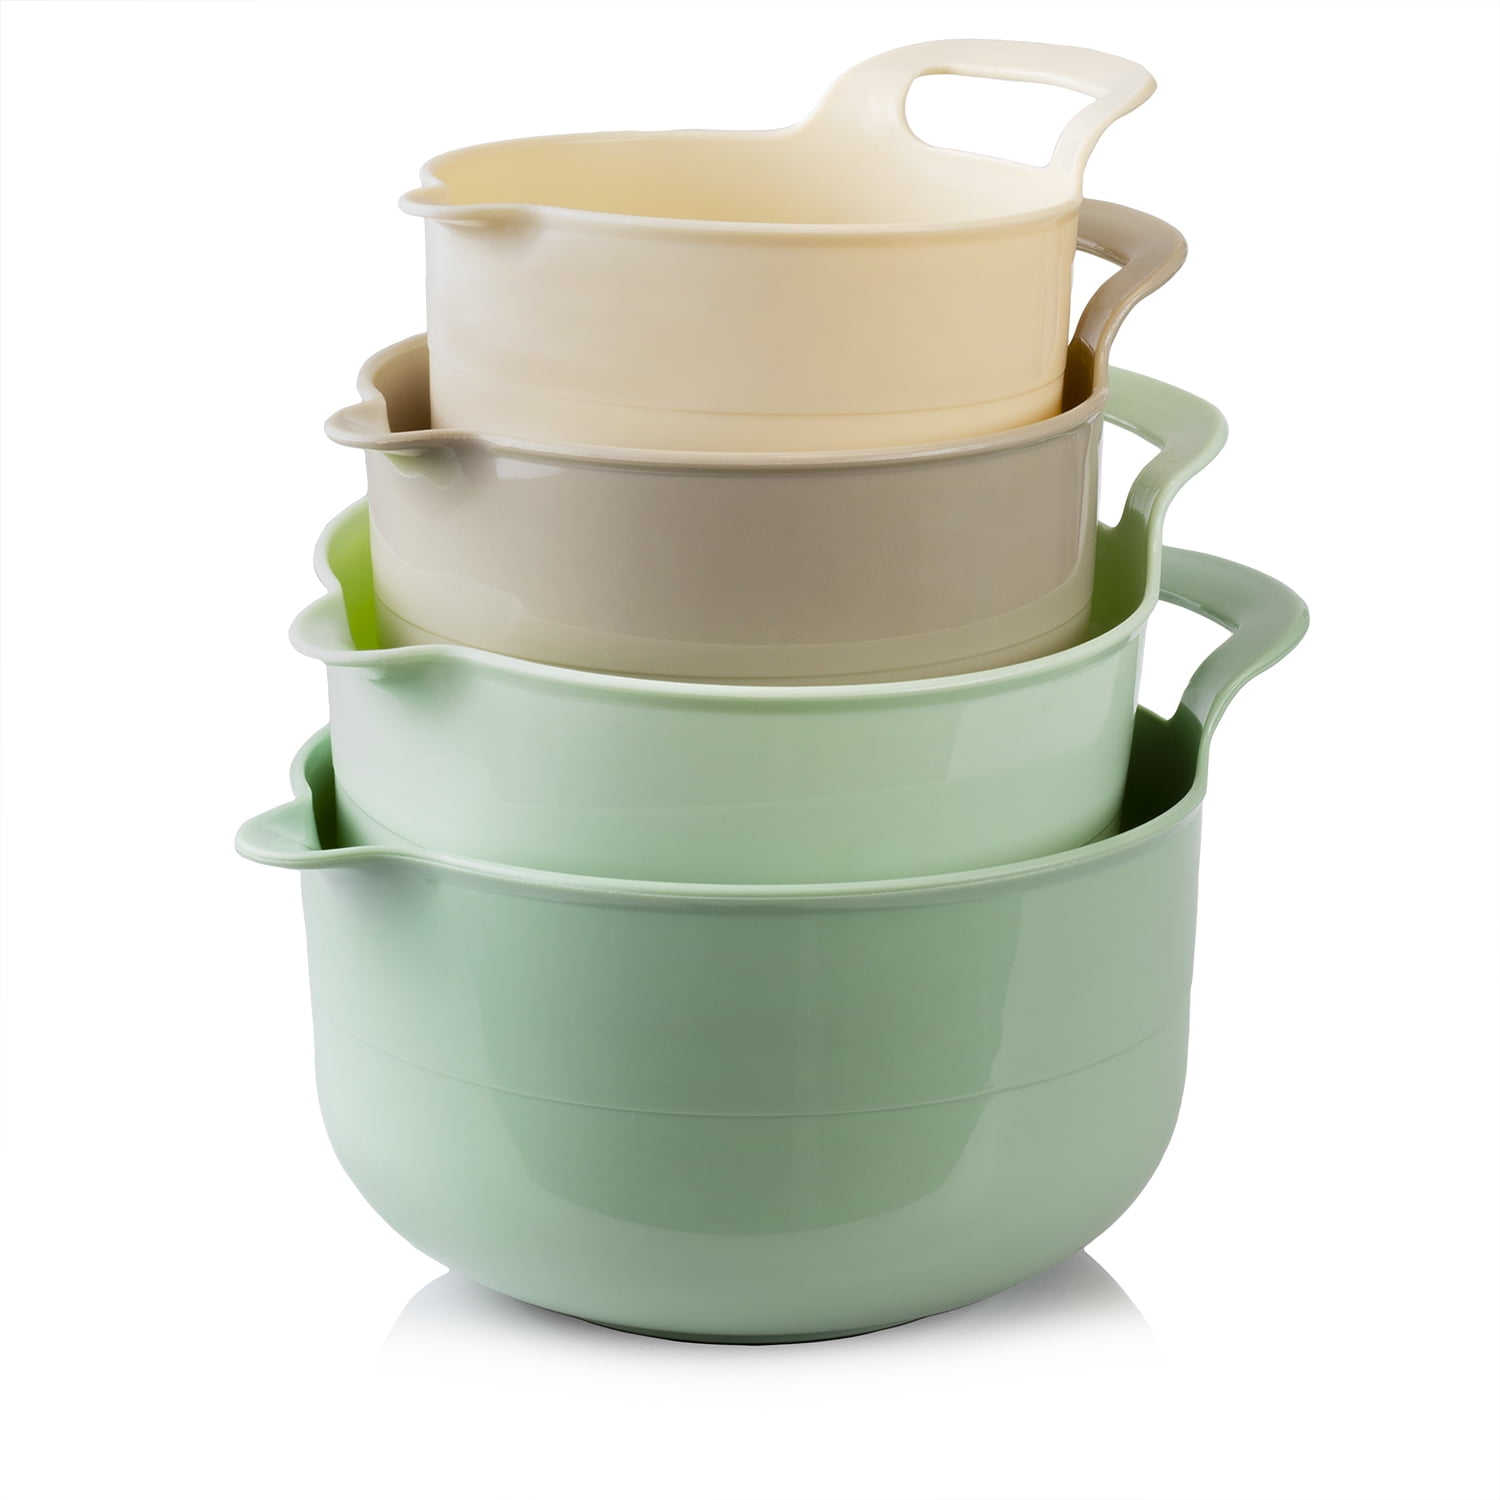 Large 4.5 Litre Plastic Mixing Bowls. In Red Colour Taupe Or Grey